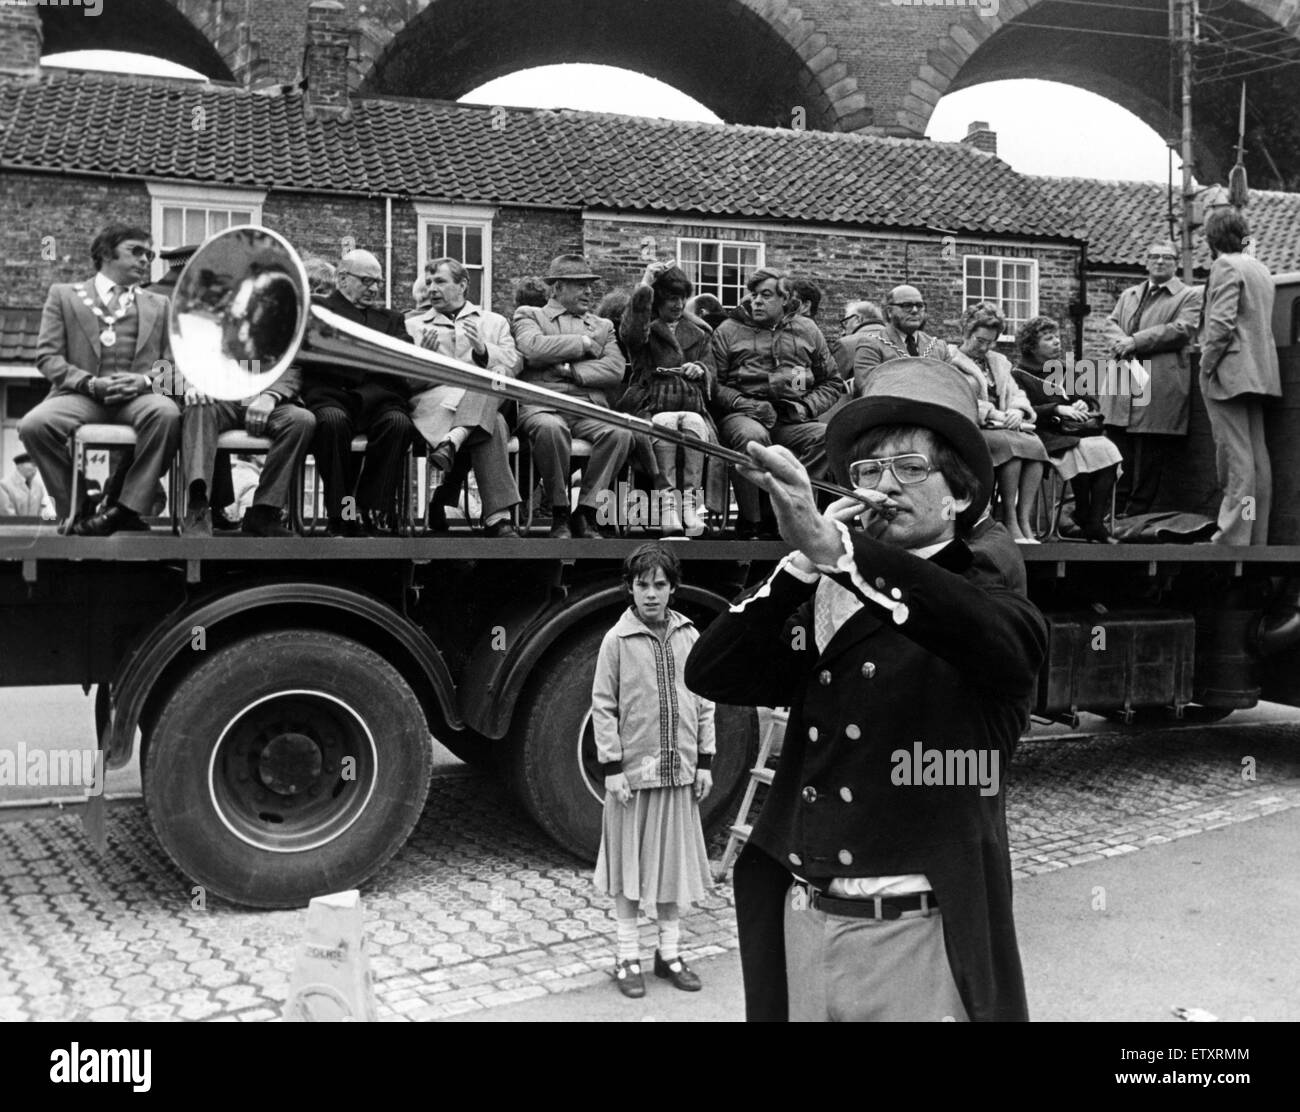 Ian Dewar of Yarm sounds the Post Horn to mark the beginning of the 'riding of the fair' at Yarm. 16th October 1982. Stock Photo